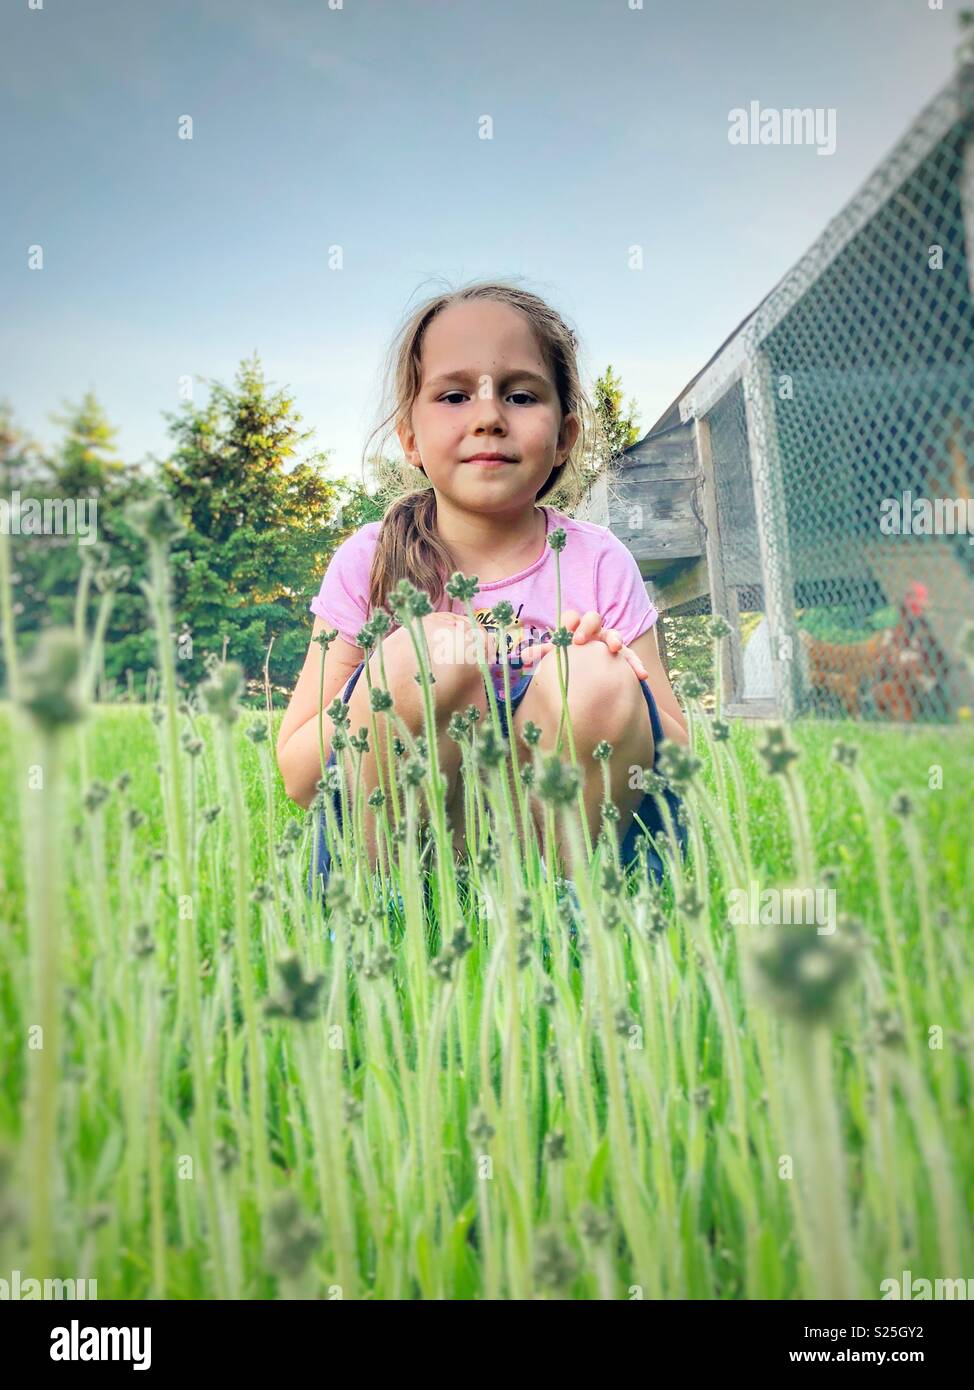 Young girl kneeling in backyard patch of weeds looking at camera Stock Photo